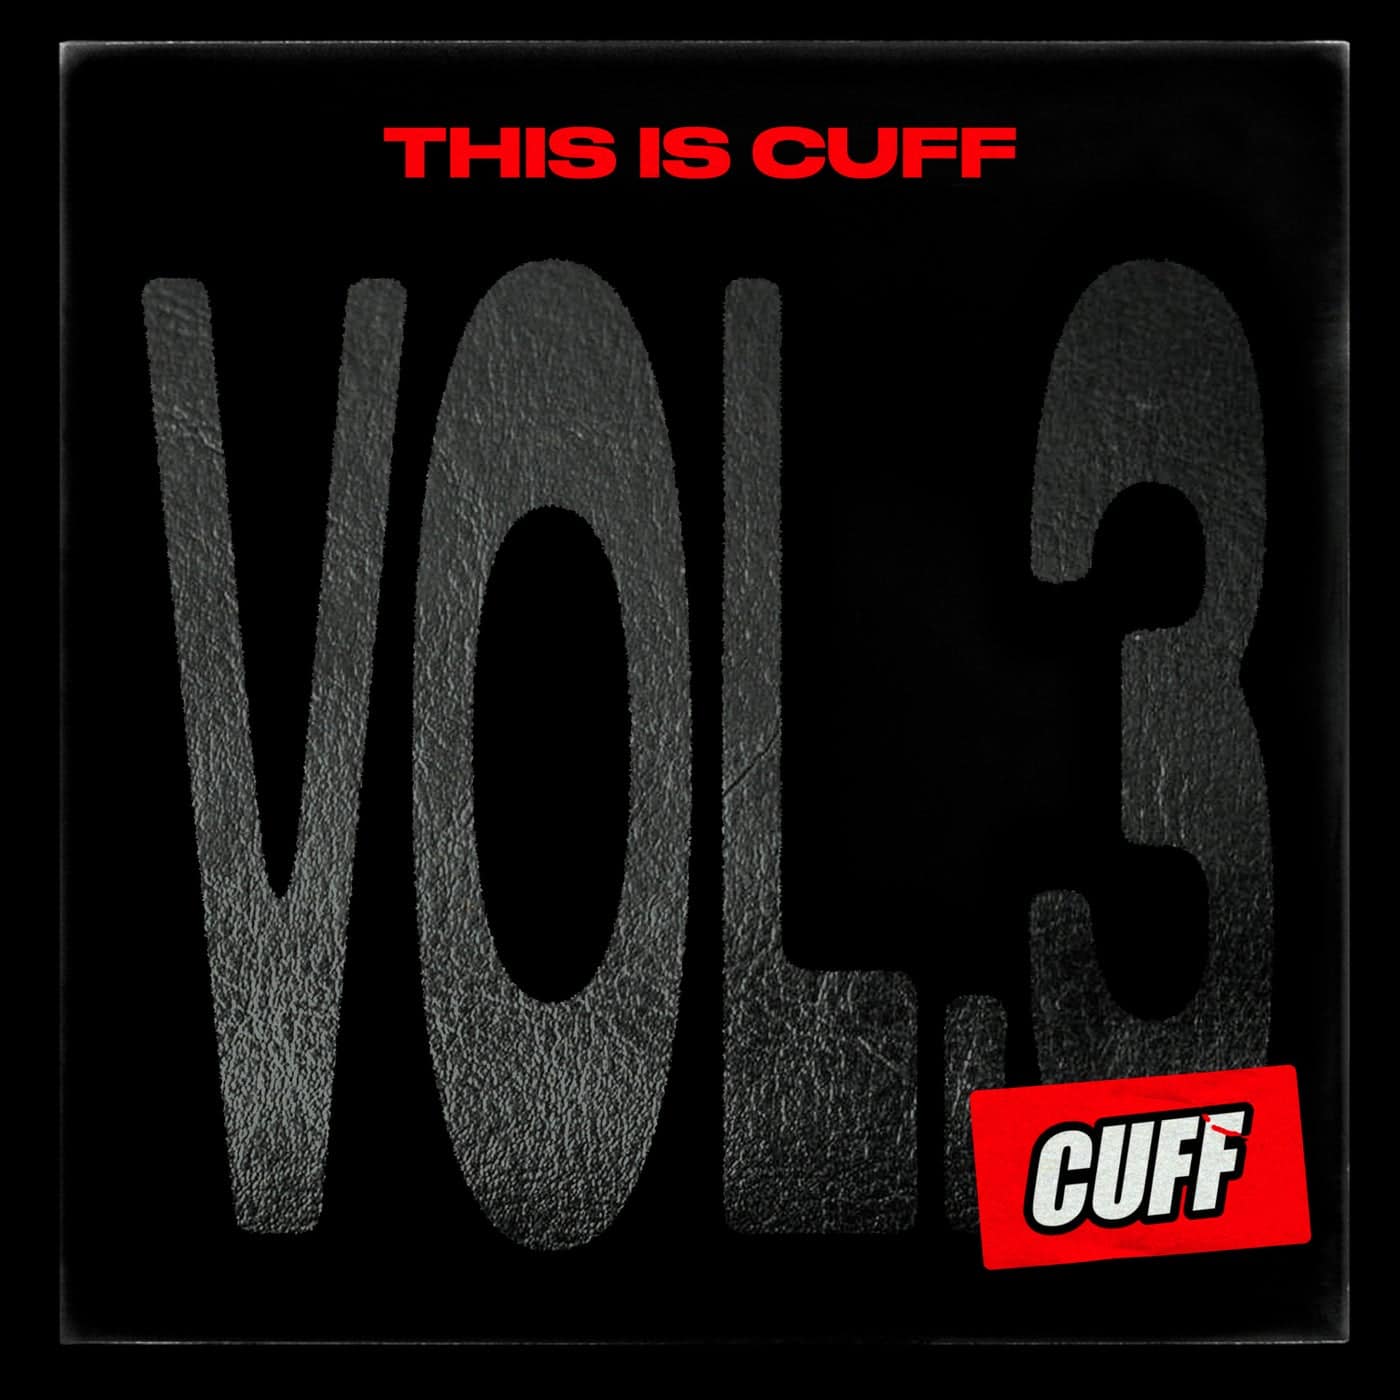 Download VA - This Is CUFF Vol.3 [CUFF180] on Electrobuzz